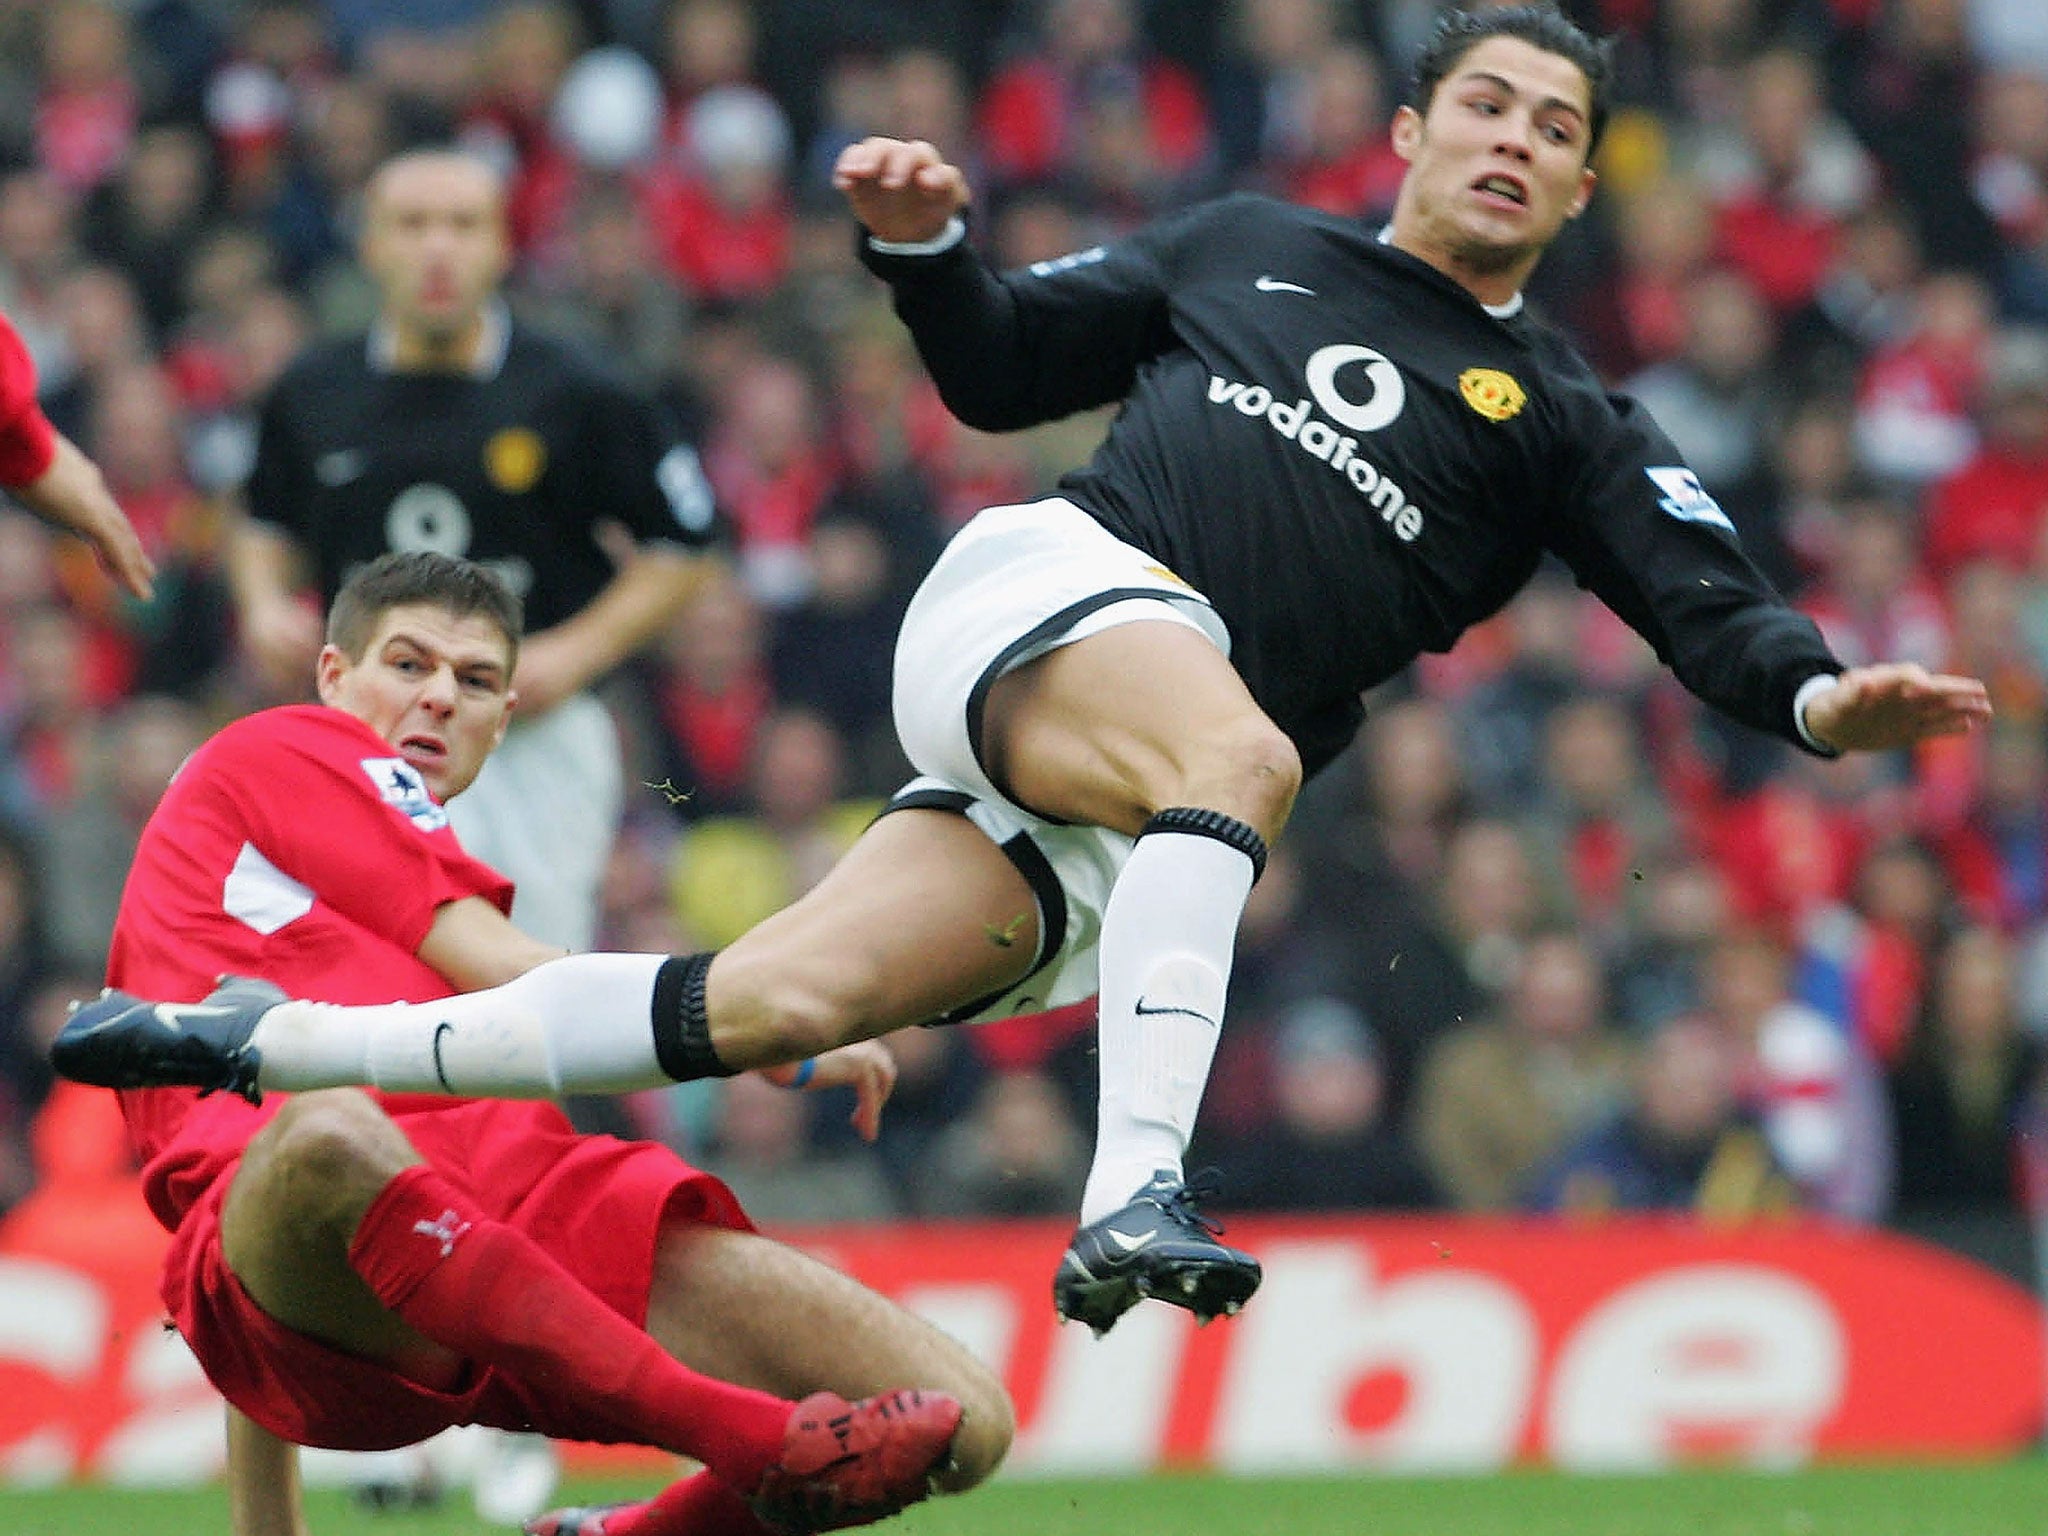 LIVERPOOL 0 MANCHESTER UNITED 1, January 2005
Ronaldo was withdrawn after 67 minutes to make way for defender John O'Shea after Wes Brown was sent off. Wayne Rooney scored.